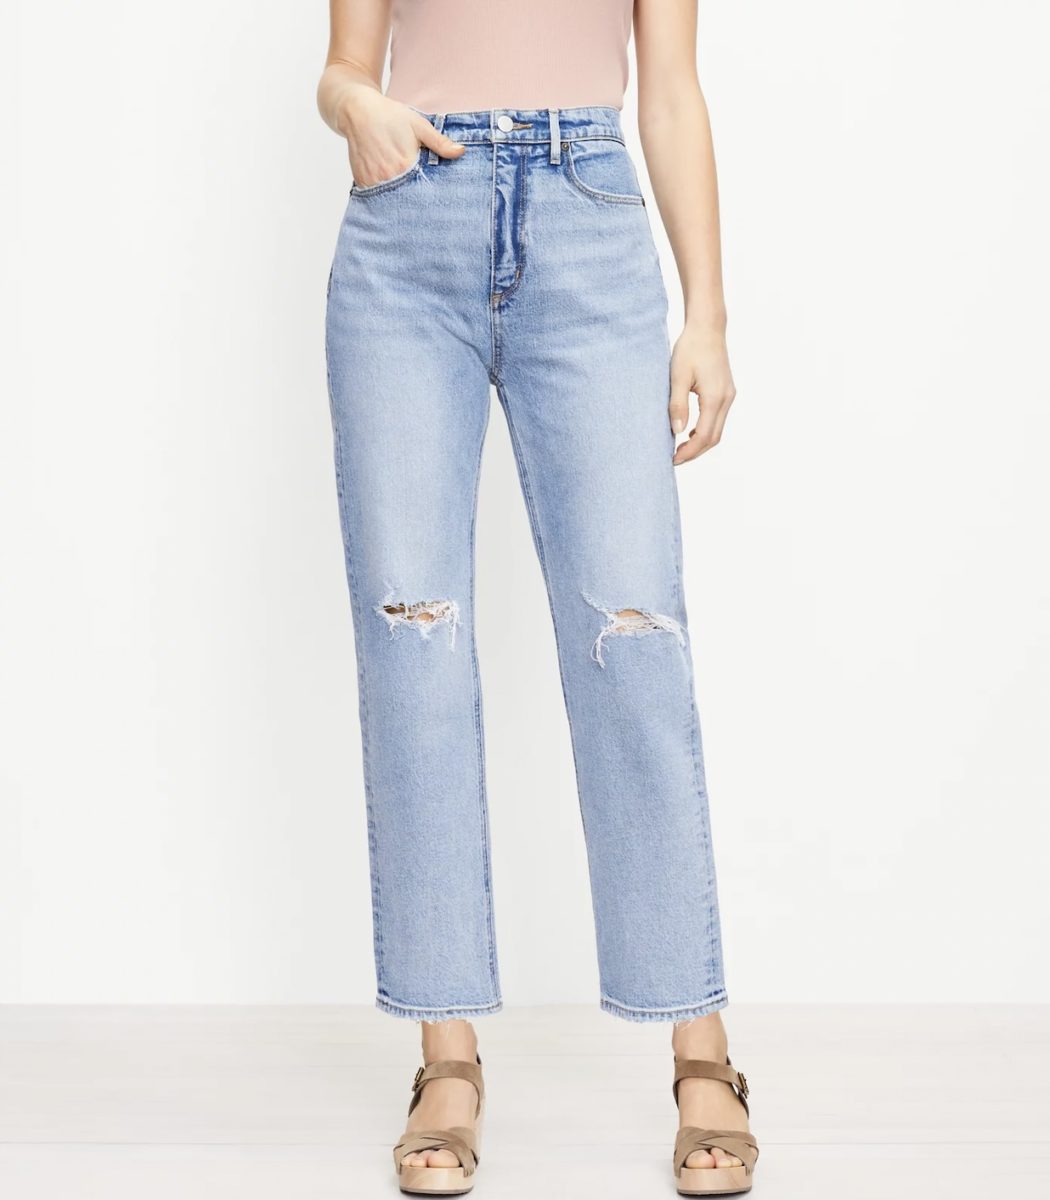 What Are Mom Jeans? Here Are 10 Stylish Pairs to Try